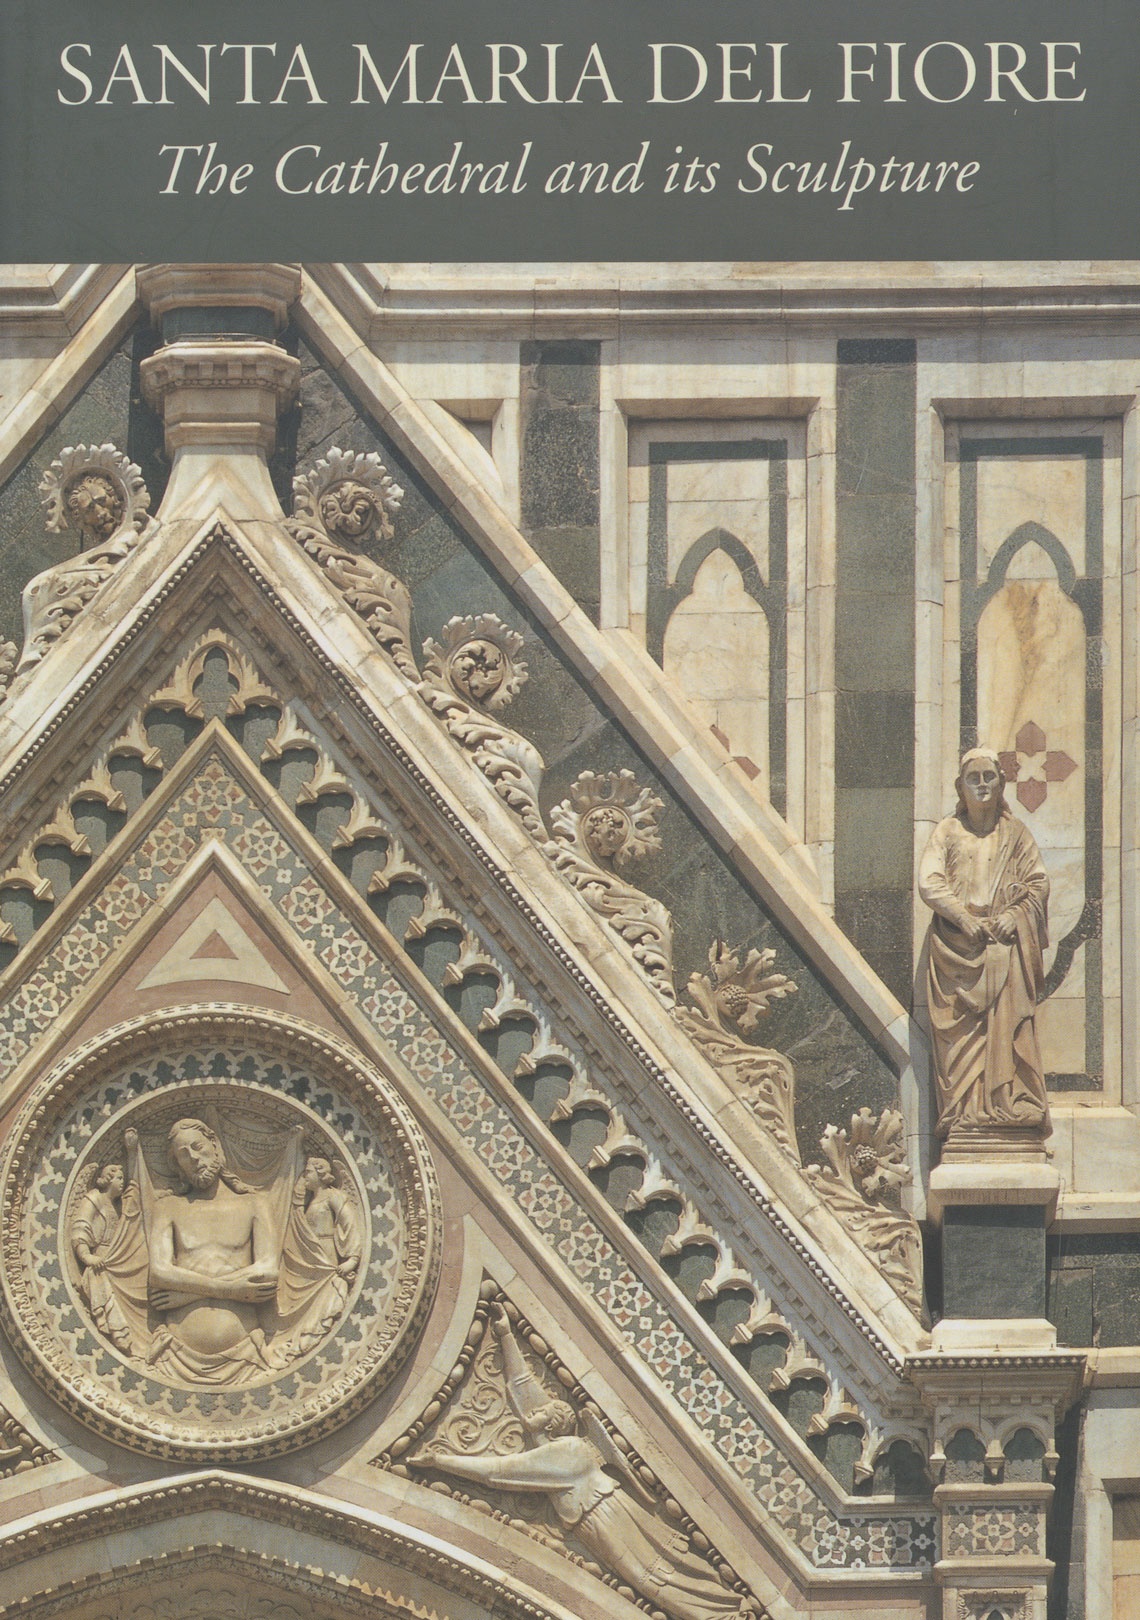 Santa Maria del Fiore: The Cathedral and its Sculpture